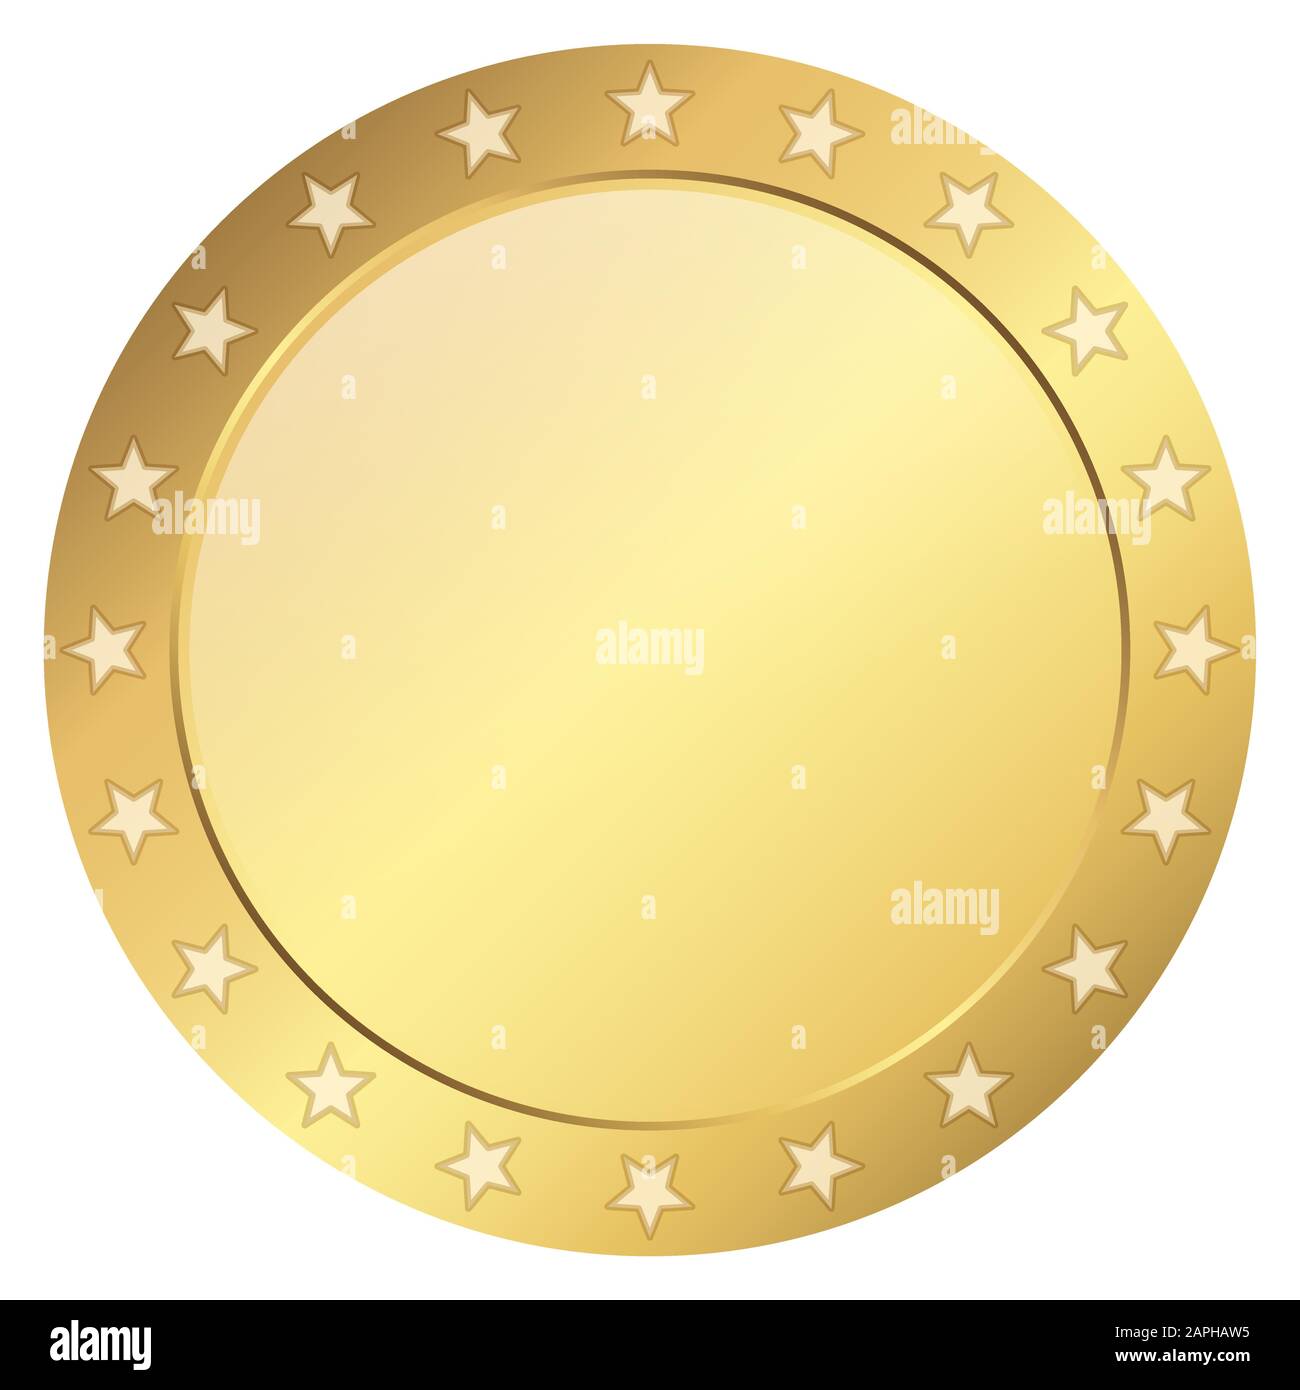 golden seal of quality template with stars and free space Stock Vector